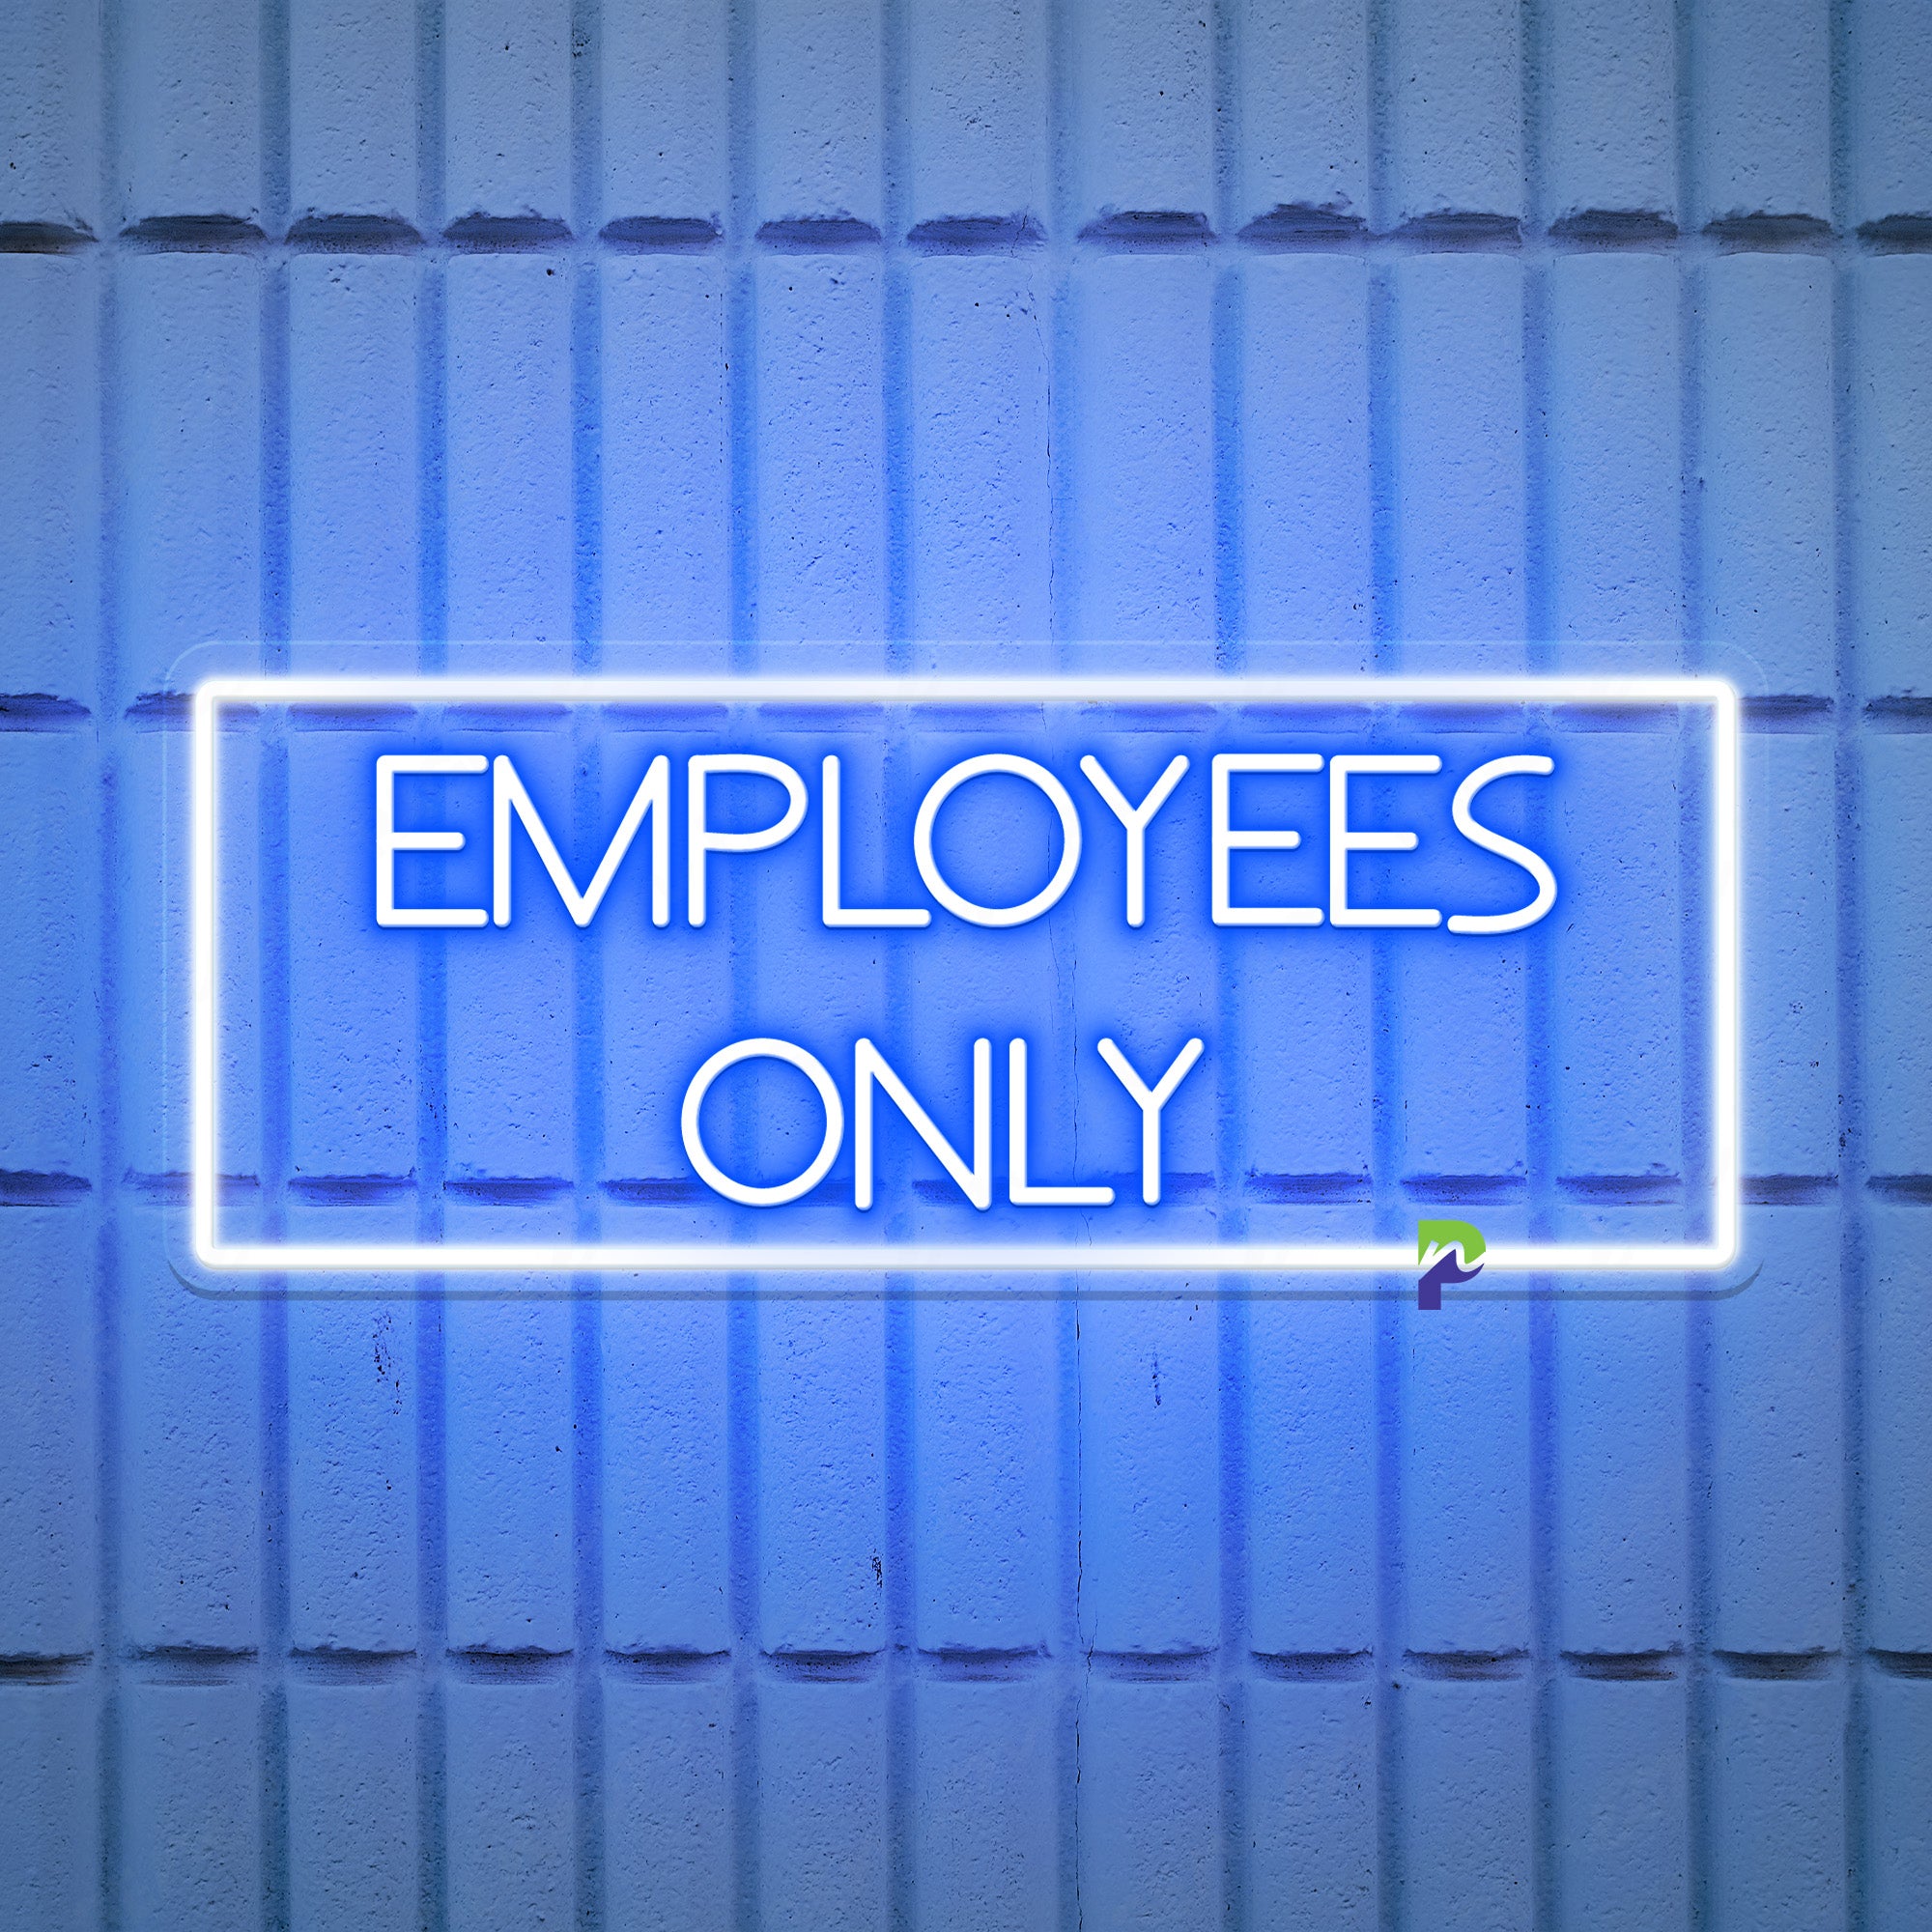 Employees Only Neon Sign Led Light For Store